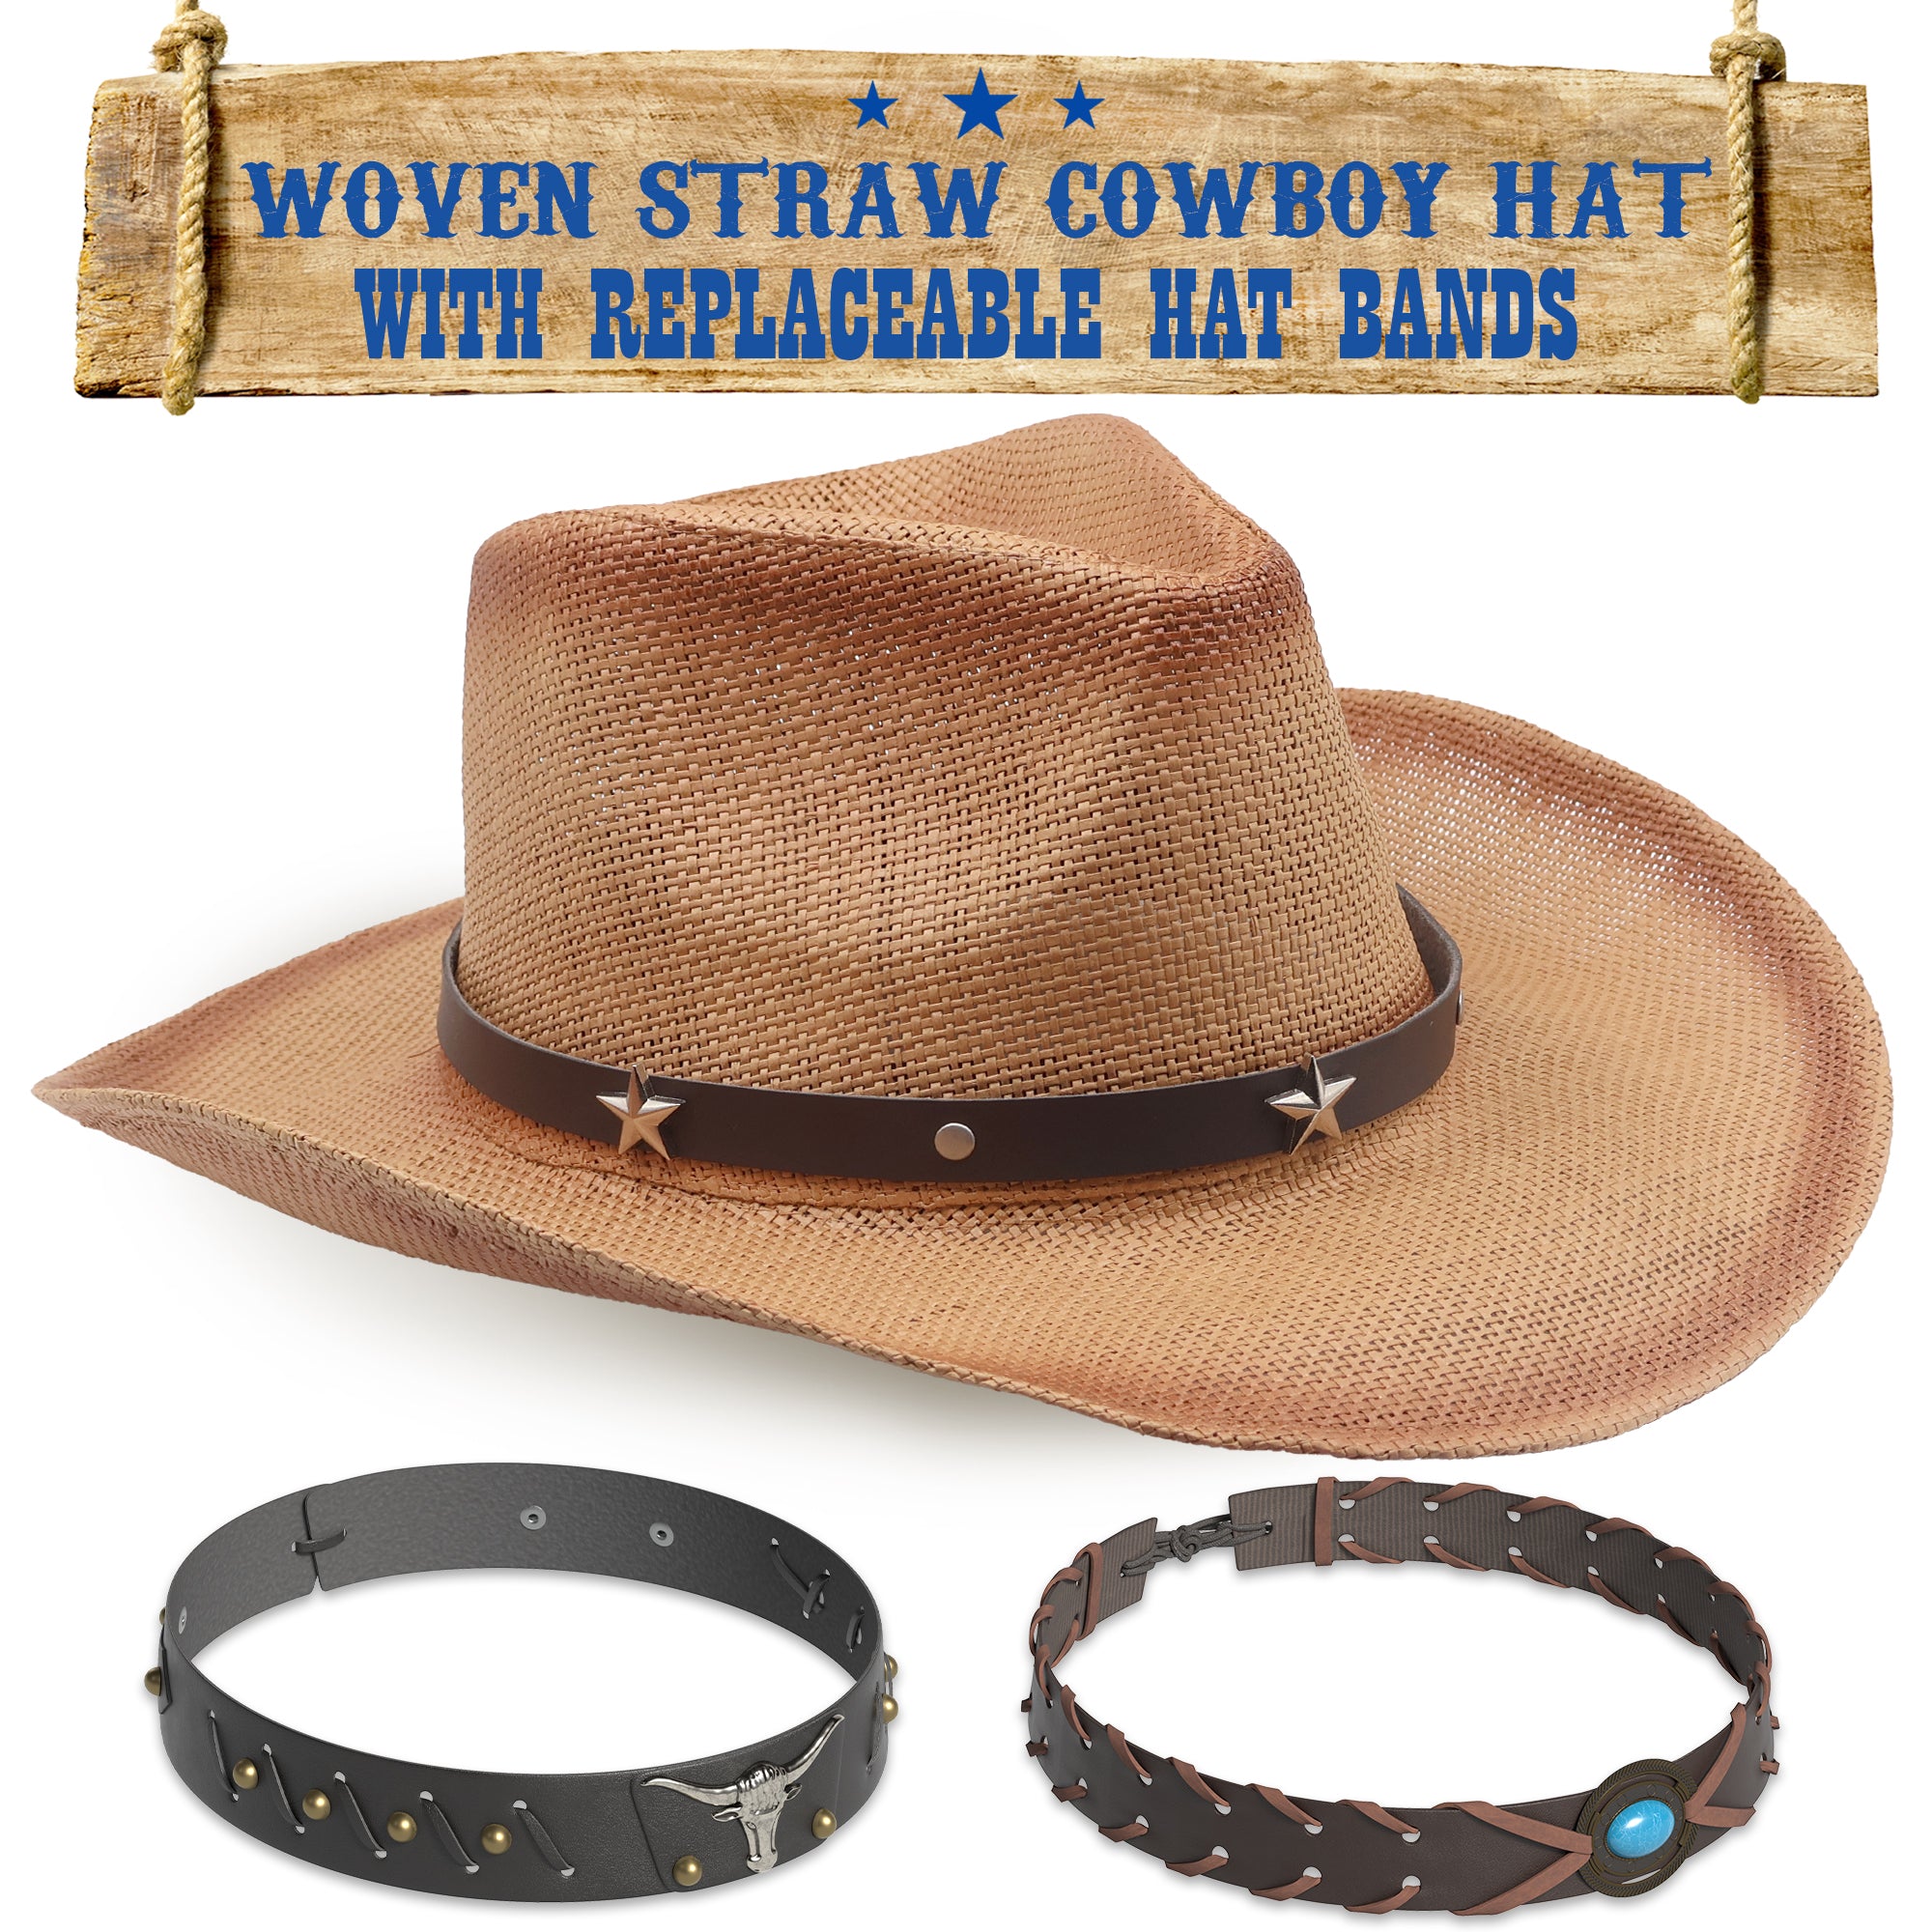 Funcredible Straw Cowboy Hat - Woven Cowgirl Hat with 3 Replaceable Hat Bands - Vintage Western Cowgirl Hat - Aesthetic Cowboy Hat for Women and Men Western Style - Trendy Cowgirl Cowboy Hat